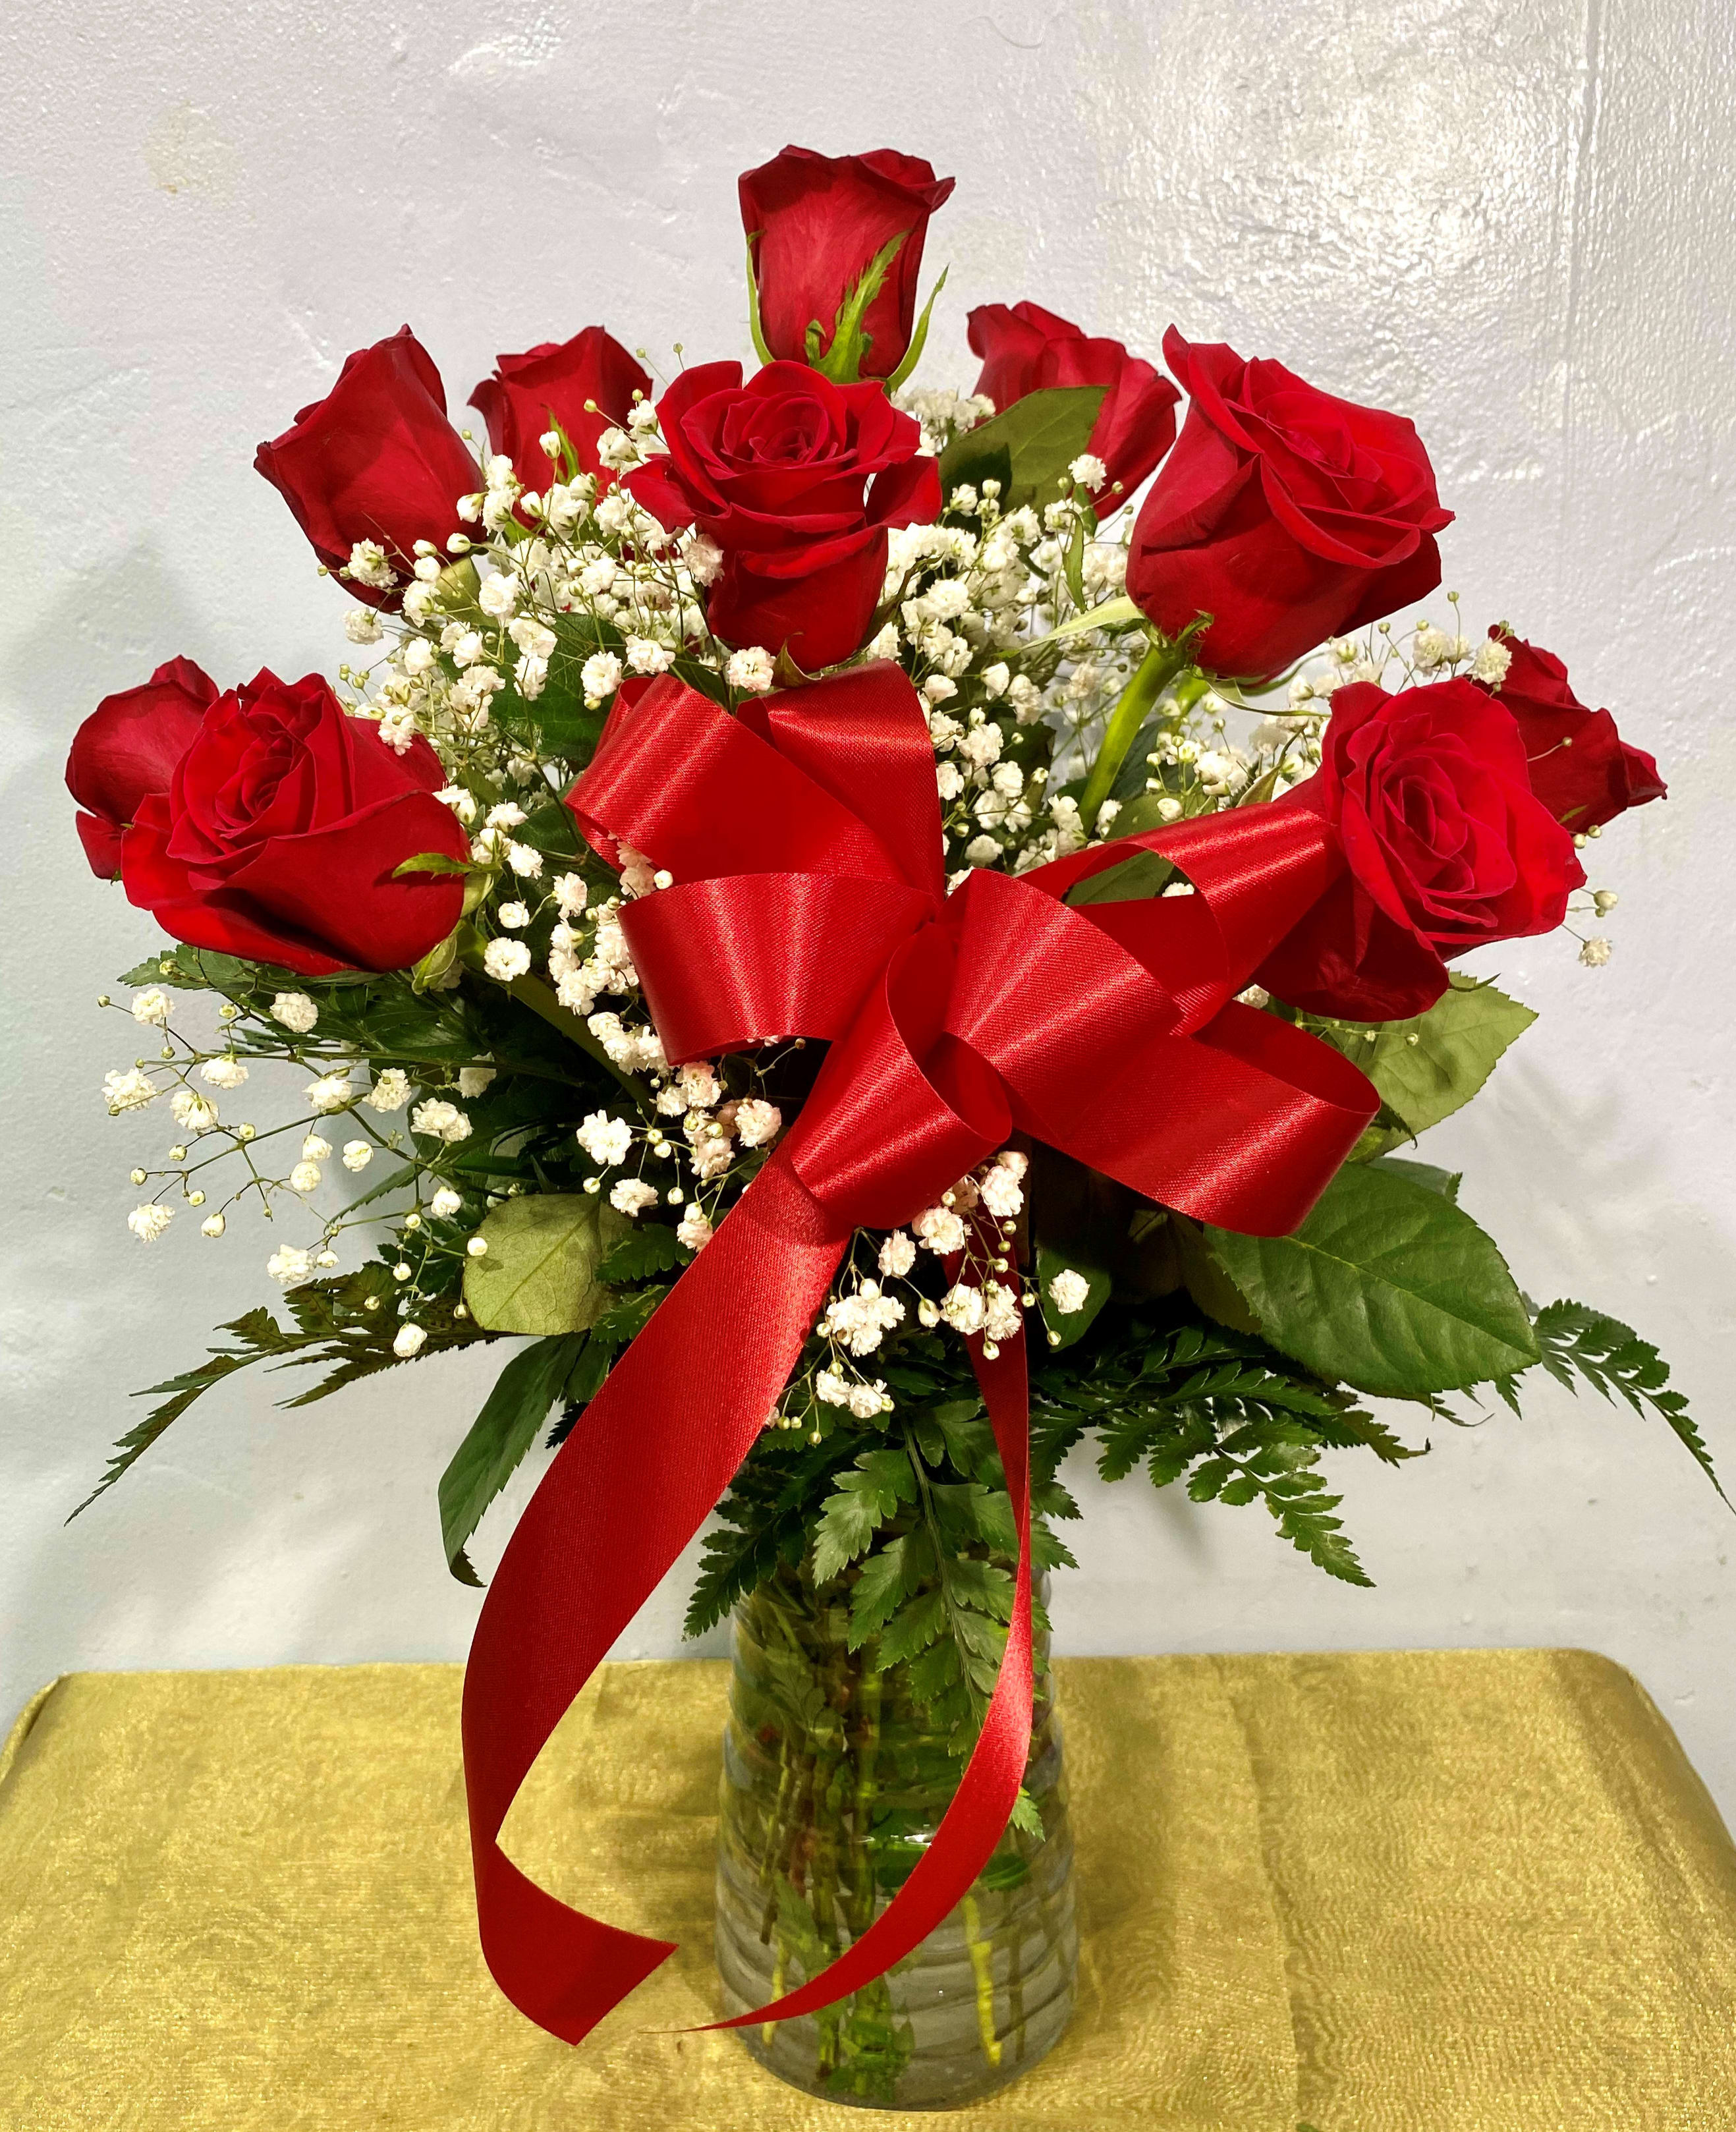 Long Stemmed Red Roses with Baby's Breath - These dozen red roses with baby's breath are a classic! The perfect romantic gift for an anniversary, birthday, or just to say &quot;I like you a lot!&quot;   APPROXIMATE DIMENSIONS: 25&quot; H X 18&quot; W